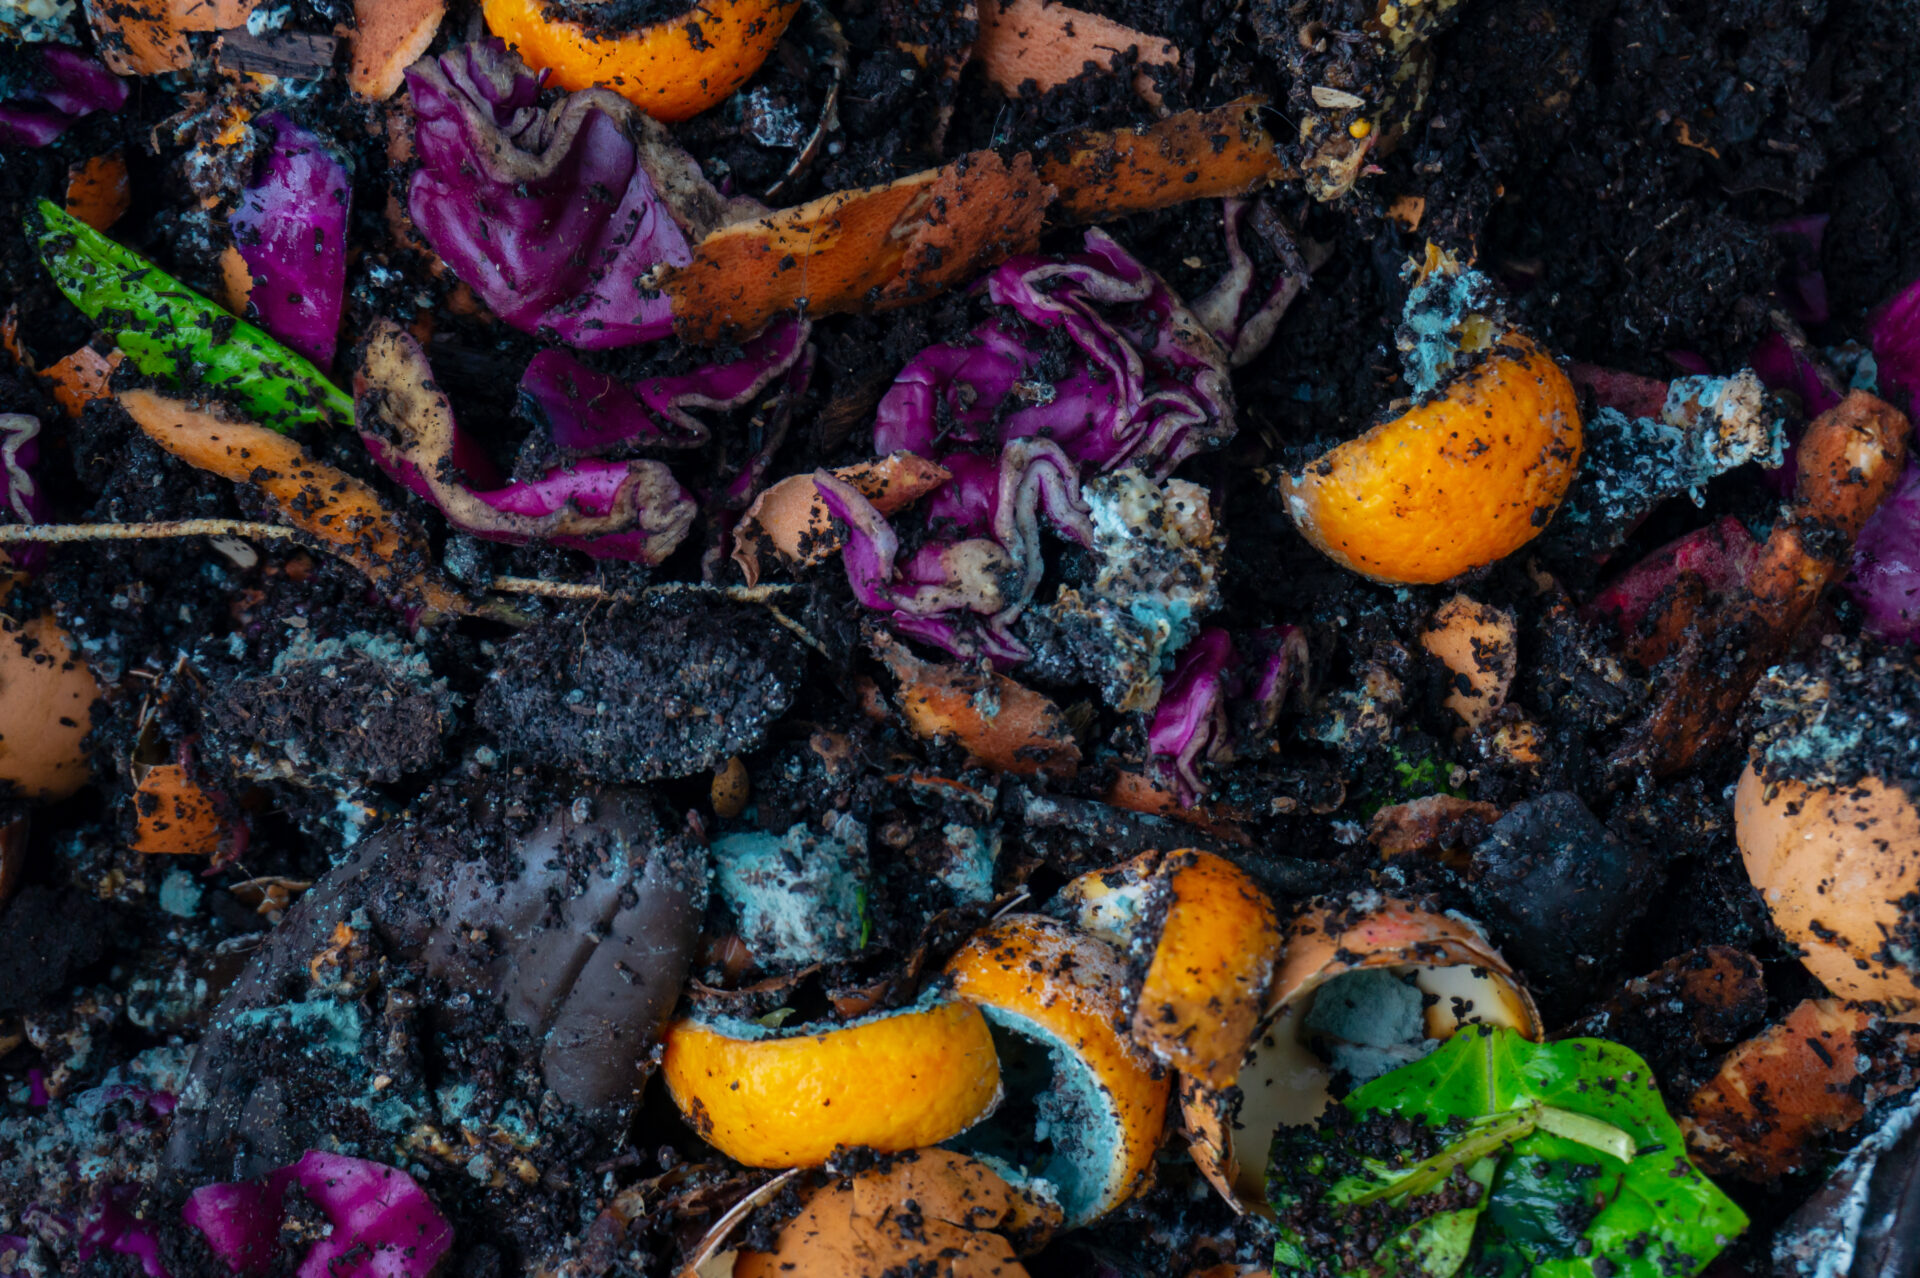 compost with rotting food scraps